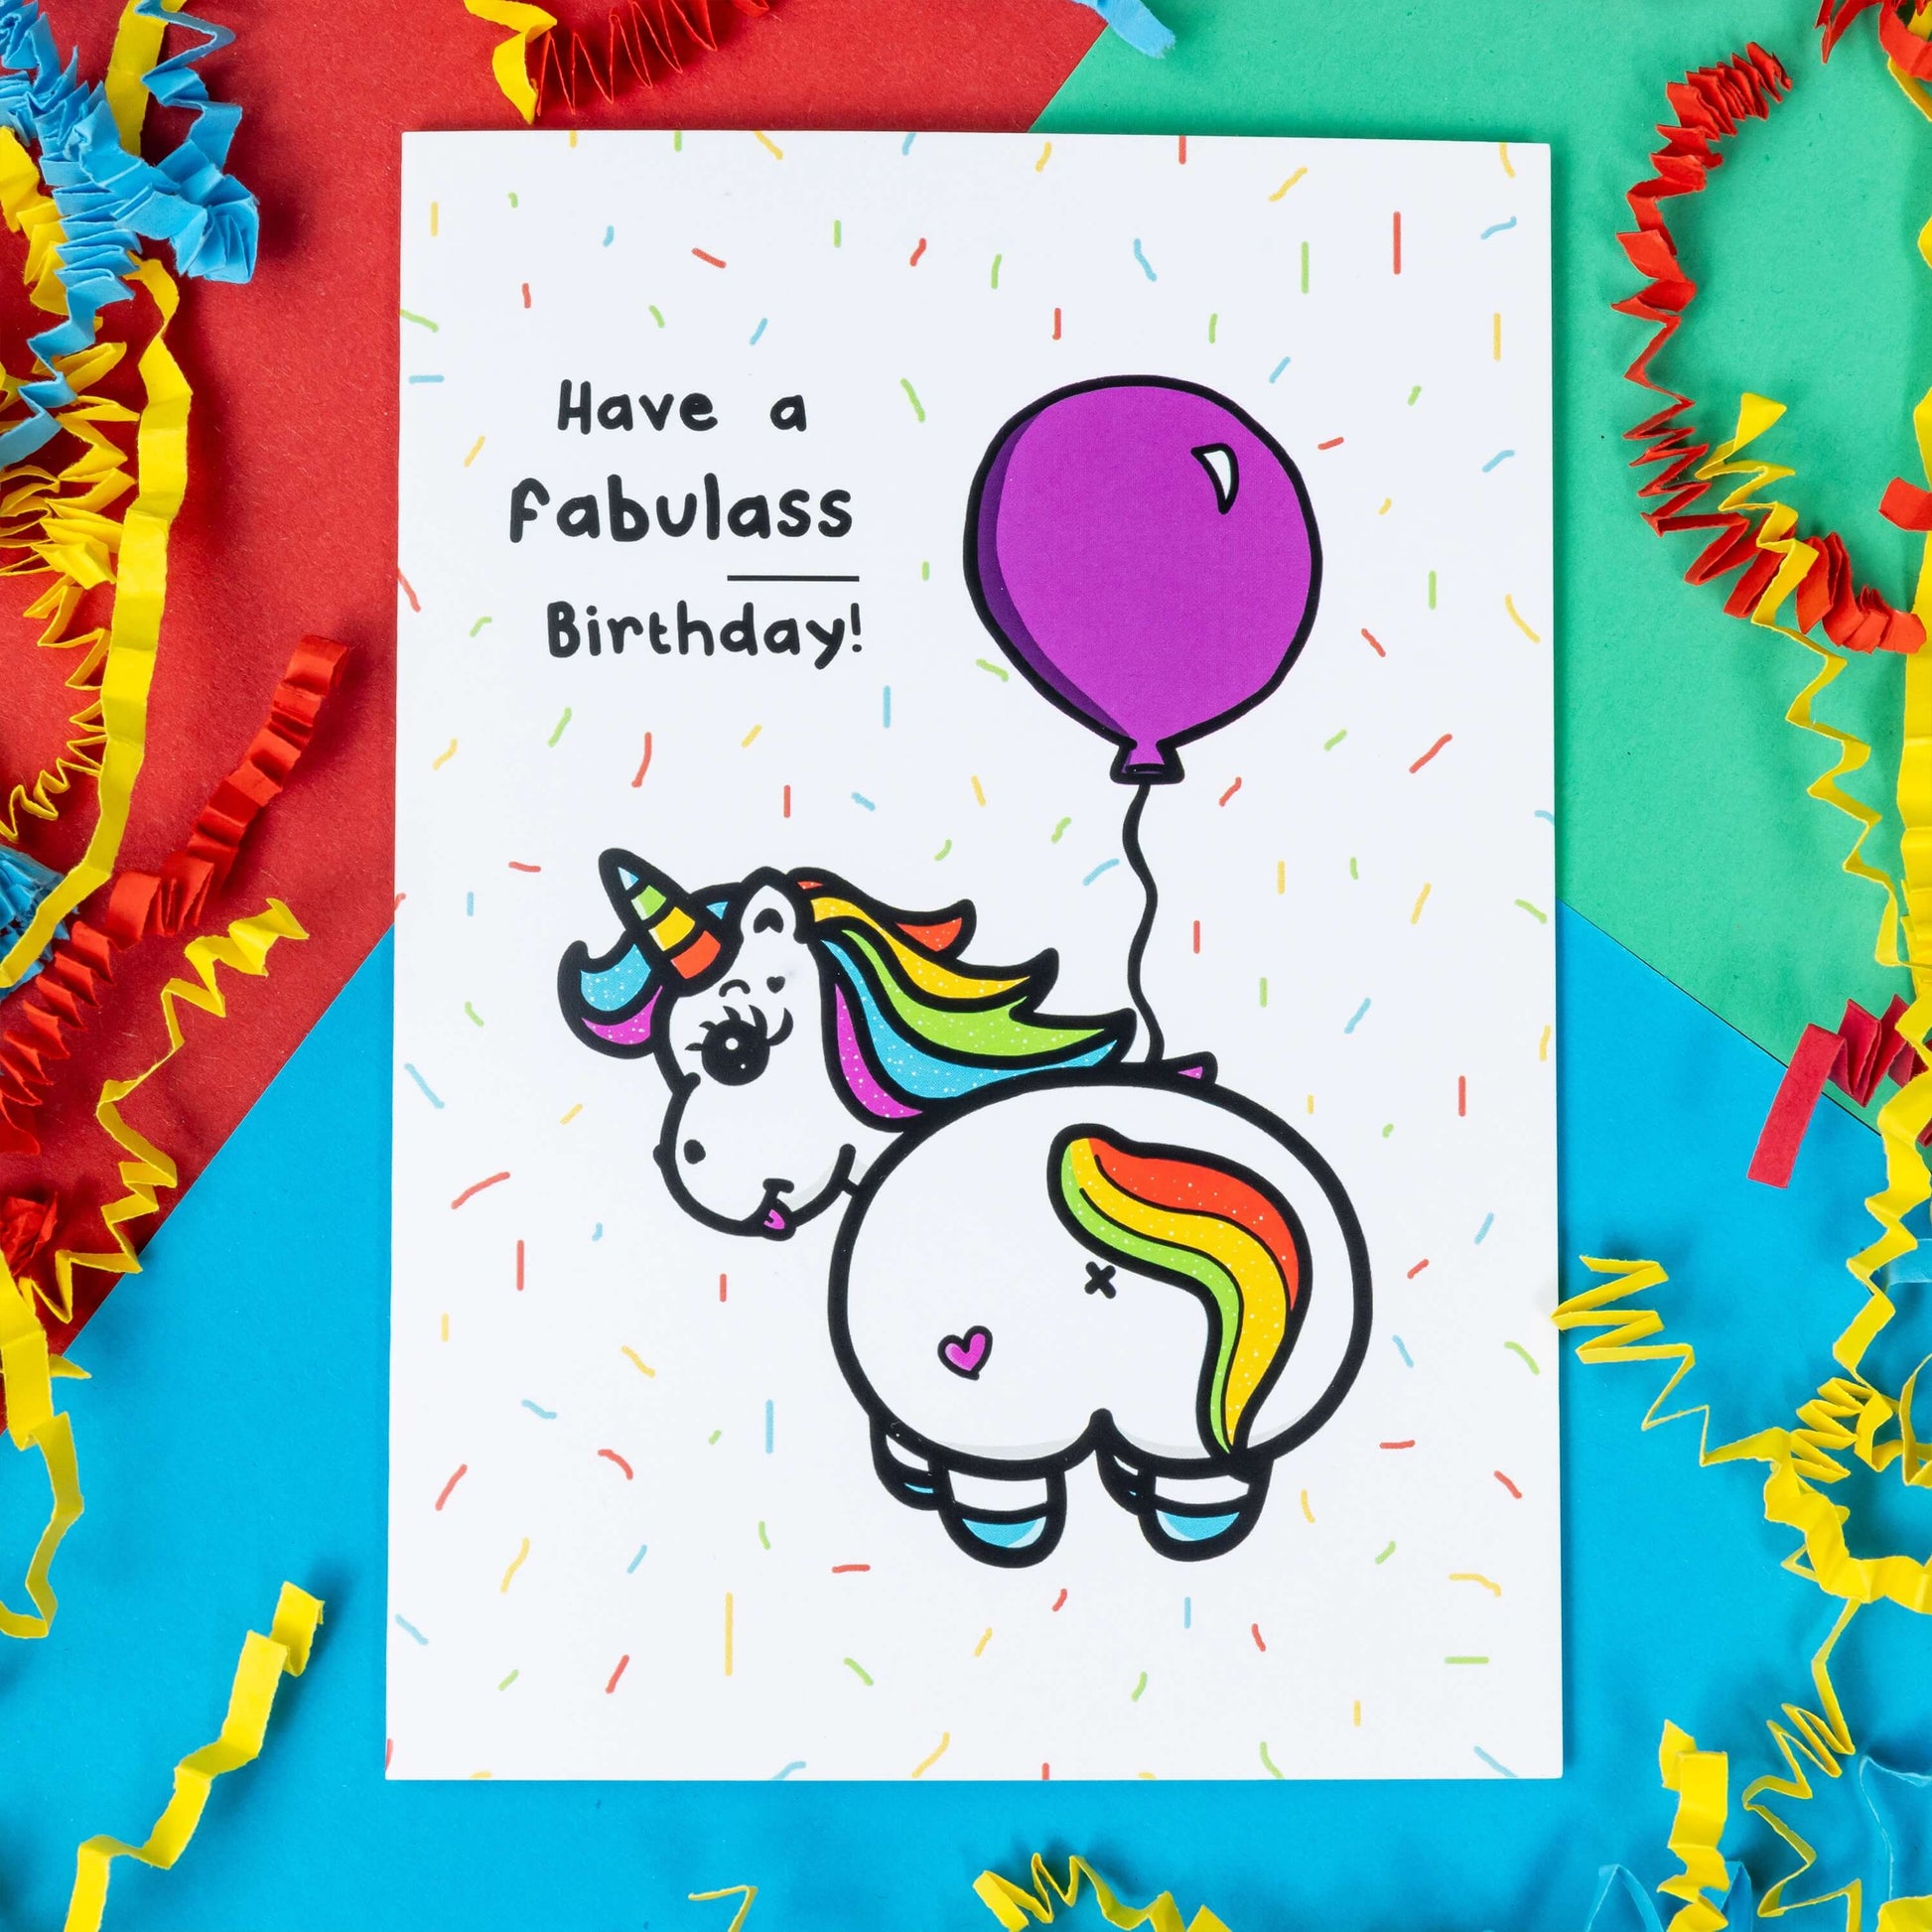 a white greeting card with an illustration of a unicorn with it's bum to the camera and looking back over it's shoulder with it's tongue out. The unicorn has rainbow coloured hair and horn and a pink love heart on it's bum and is holding a pink balloon. There is rainbow confetti all over the card and 'Have a fabulass Birthday!' is written in black with 'ass' underlined. The background of the photo is red, green and blue card with red and yellow paper decorations.